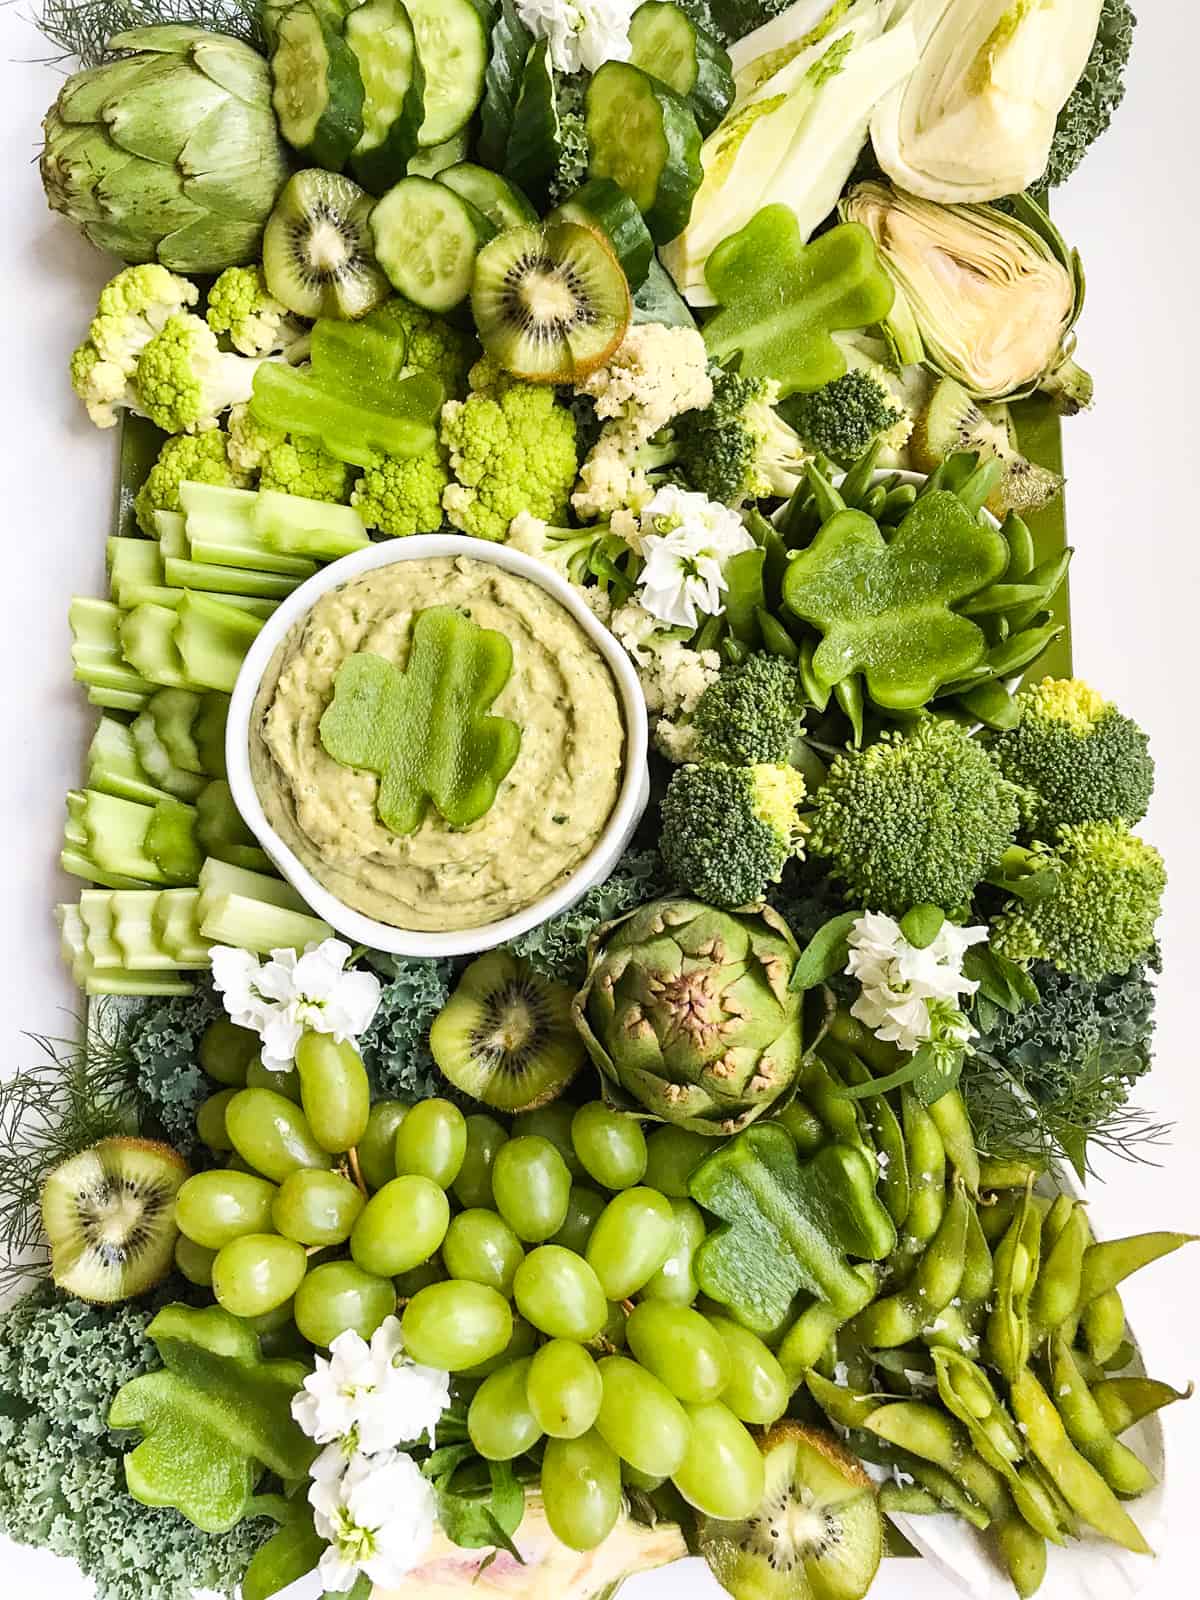 A large green food vegetable and fruit tray with a green dip in a white bowl for St Patrick's Day.